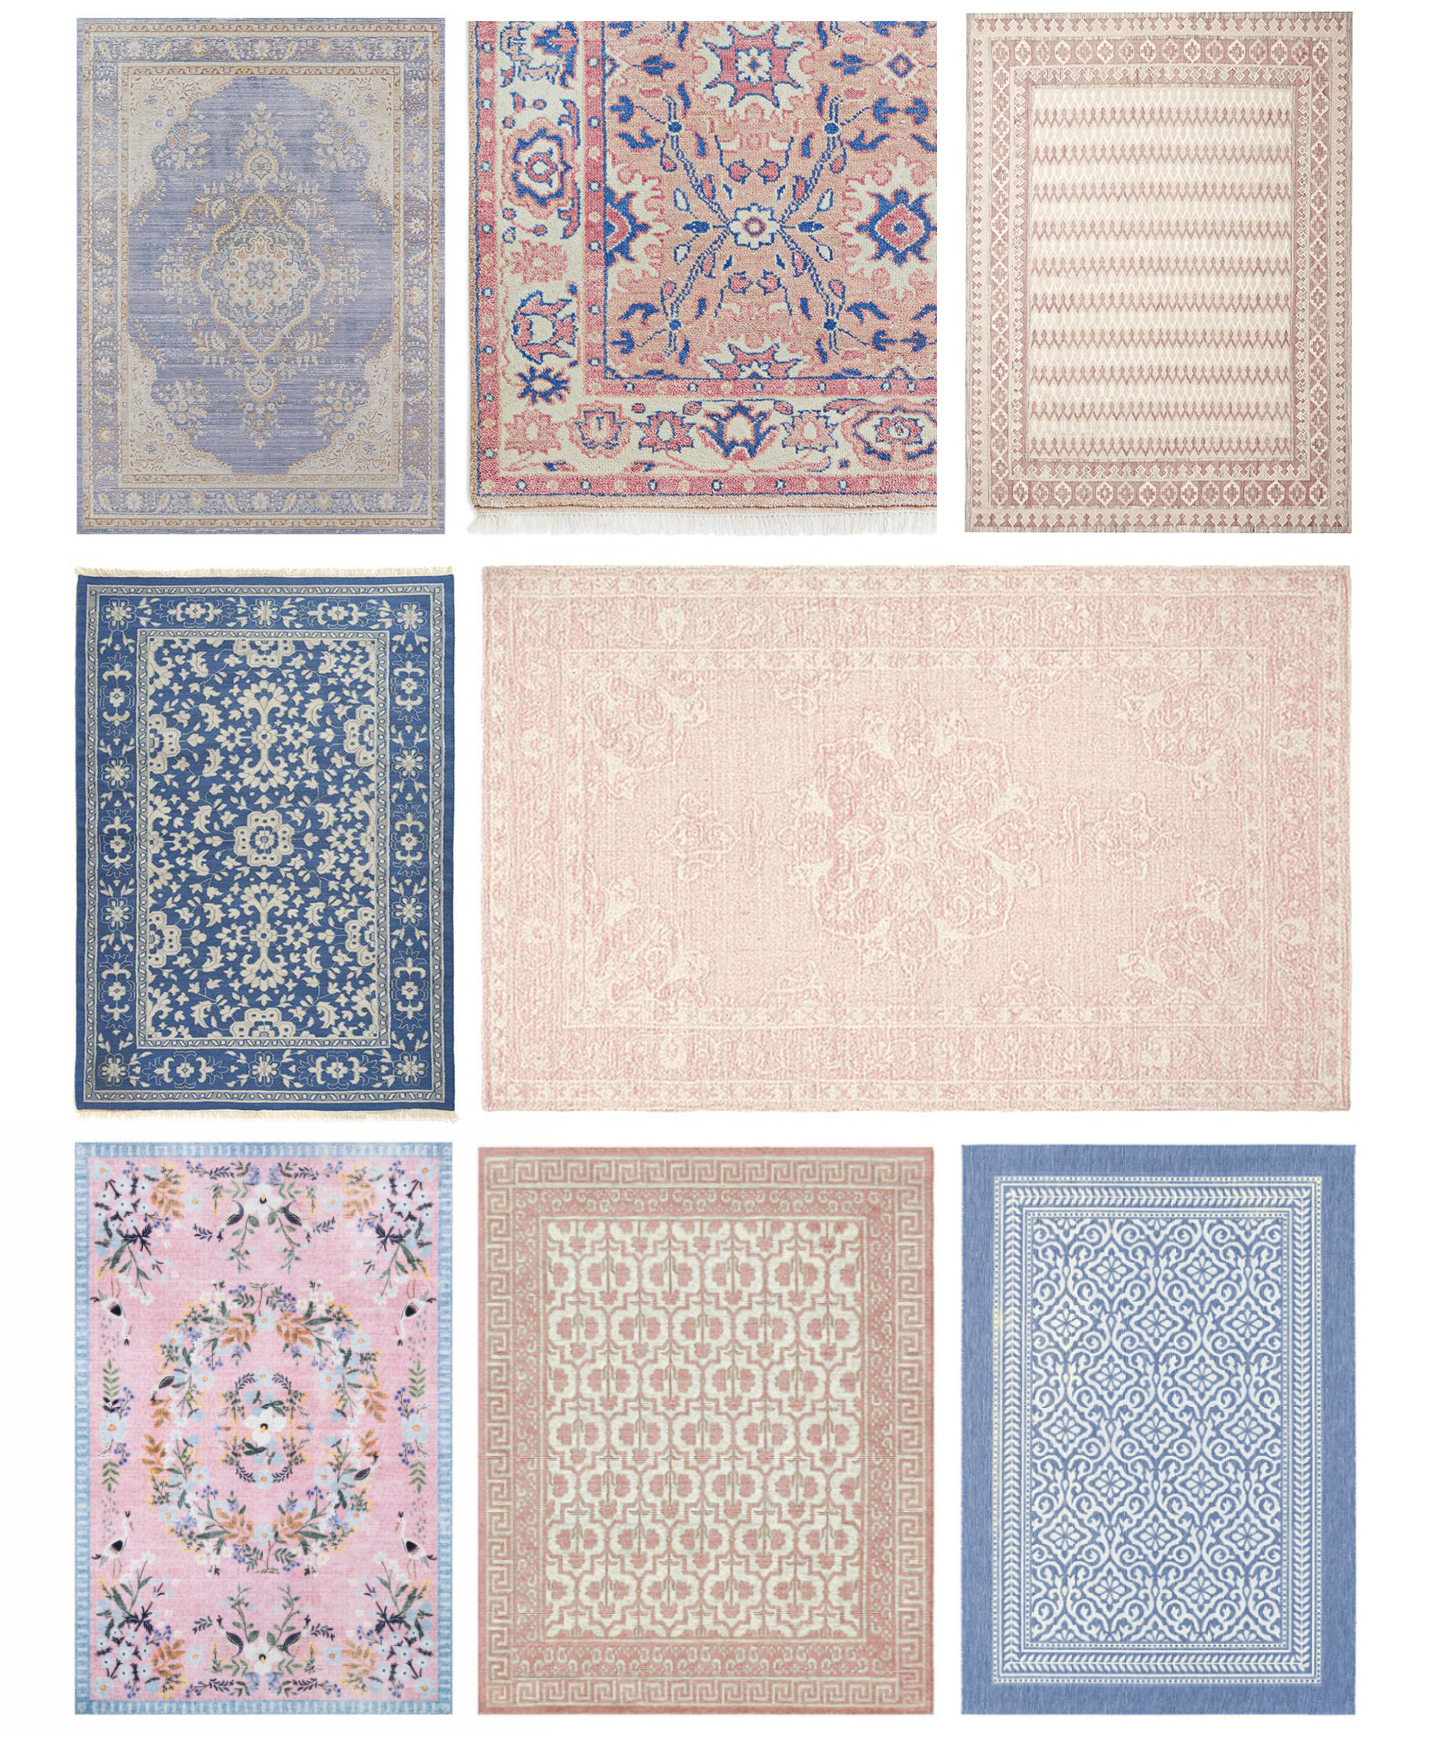 Rugs for Little Girls' Rooms